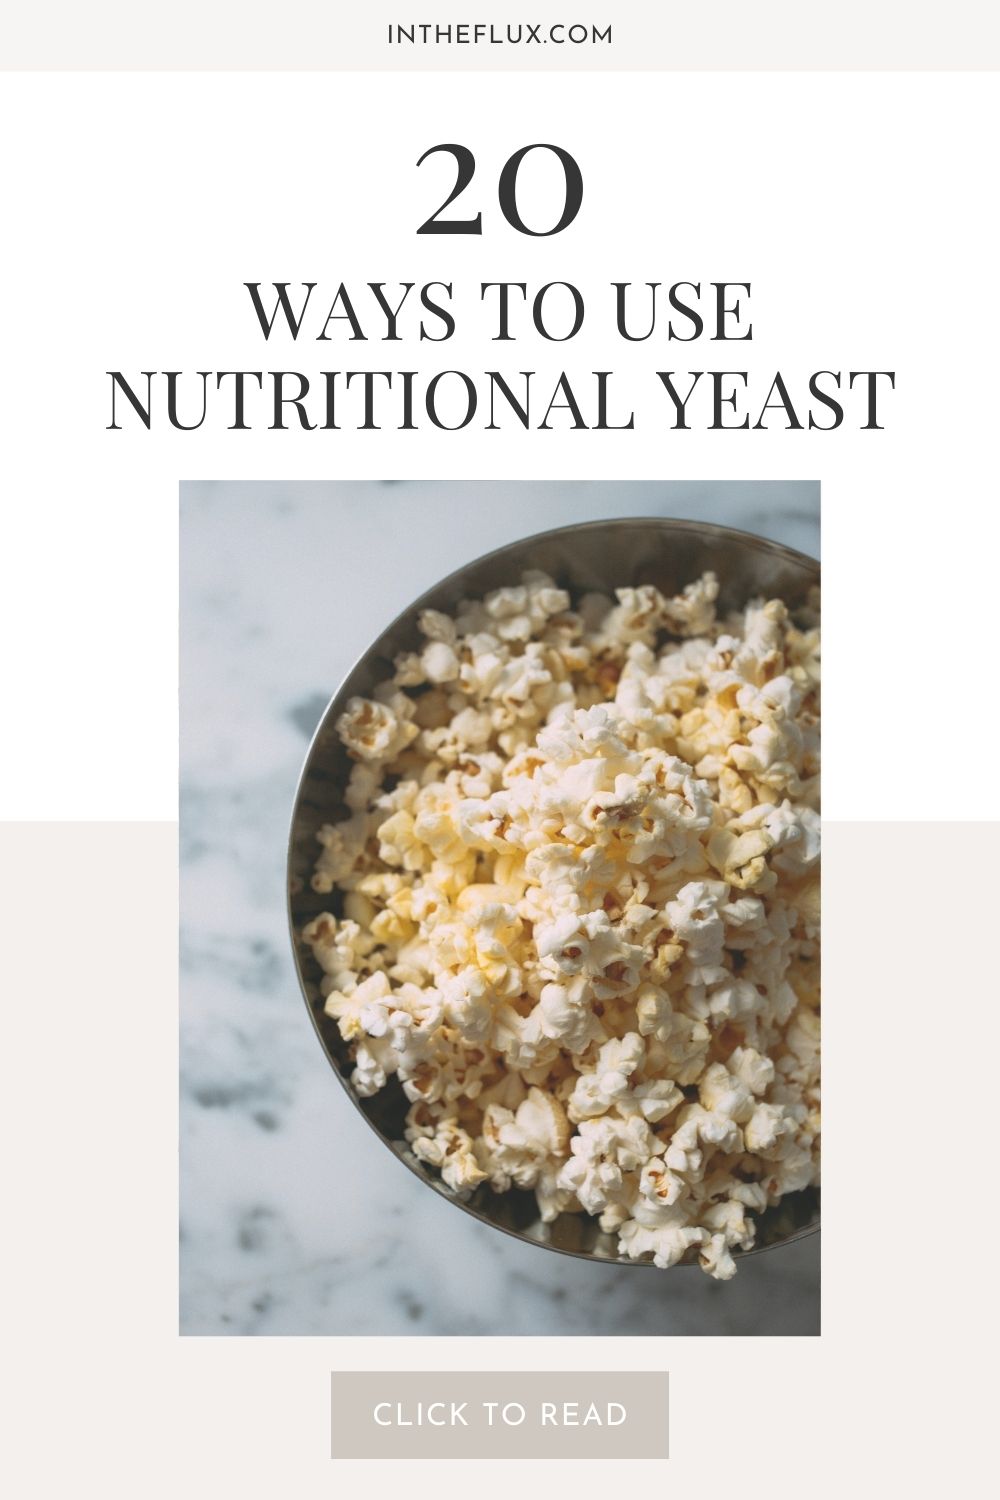 20 Ways to Use Nutritional Yeast | In The Flux